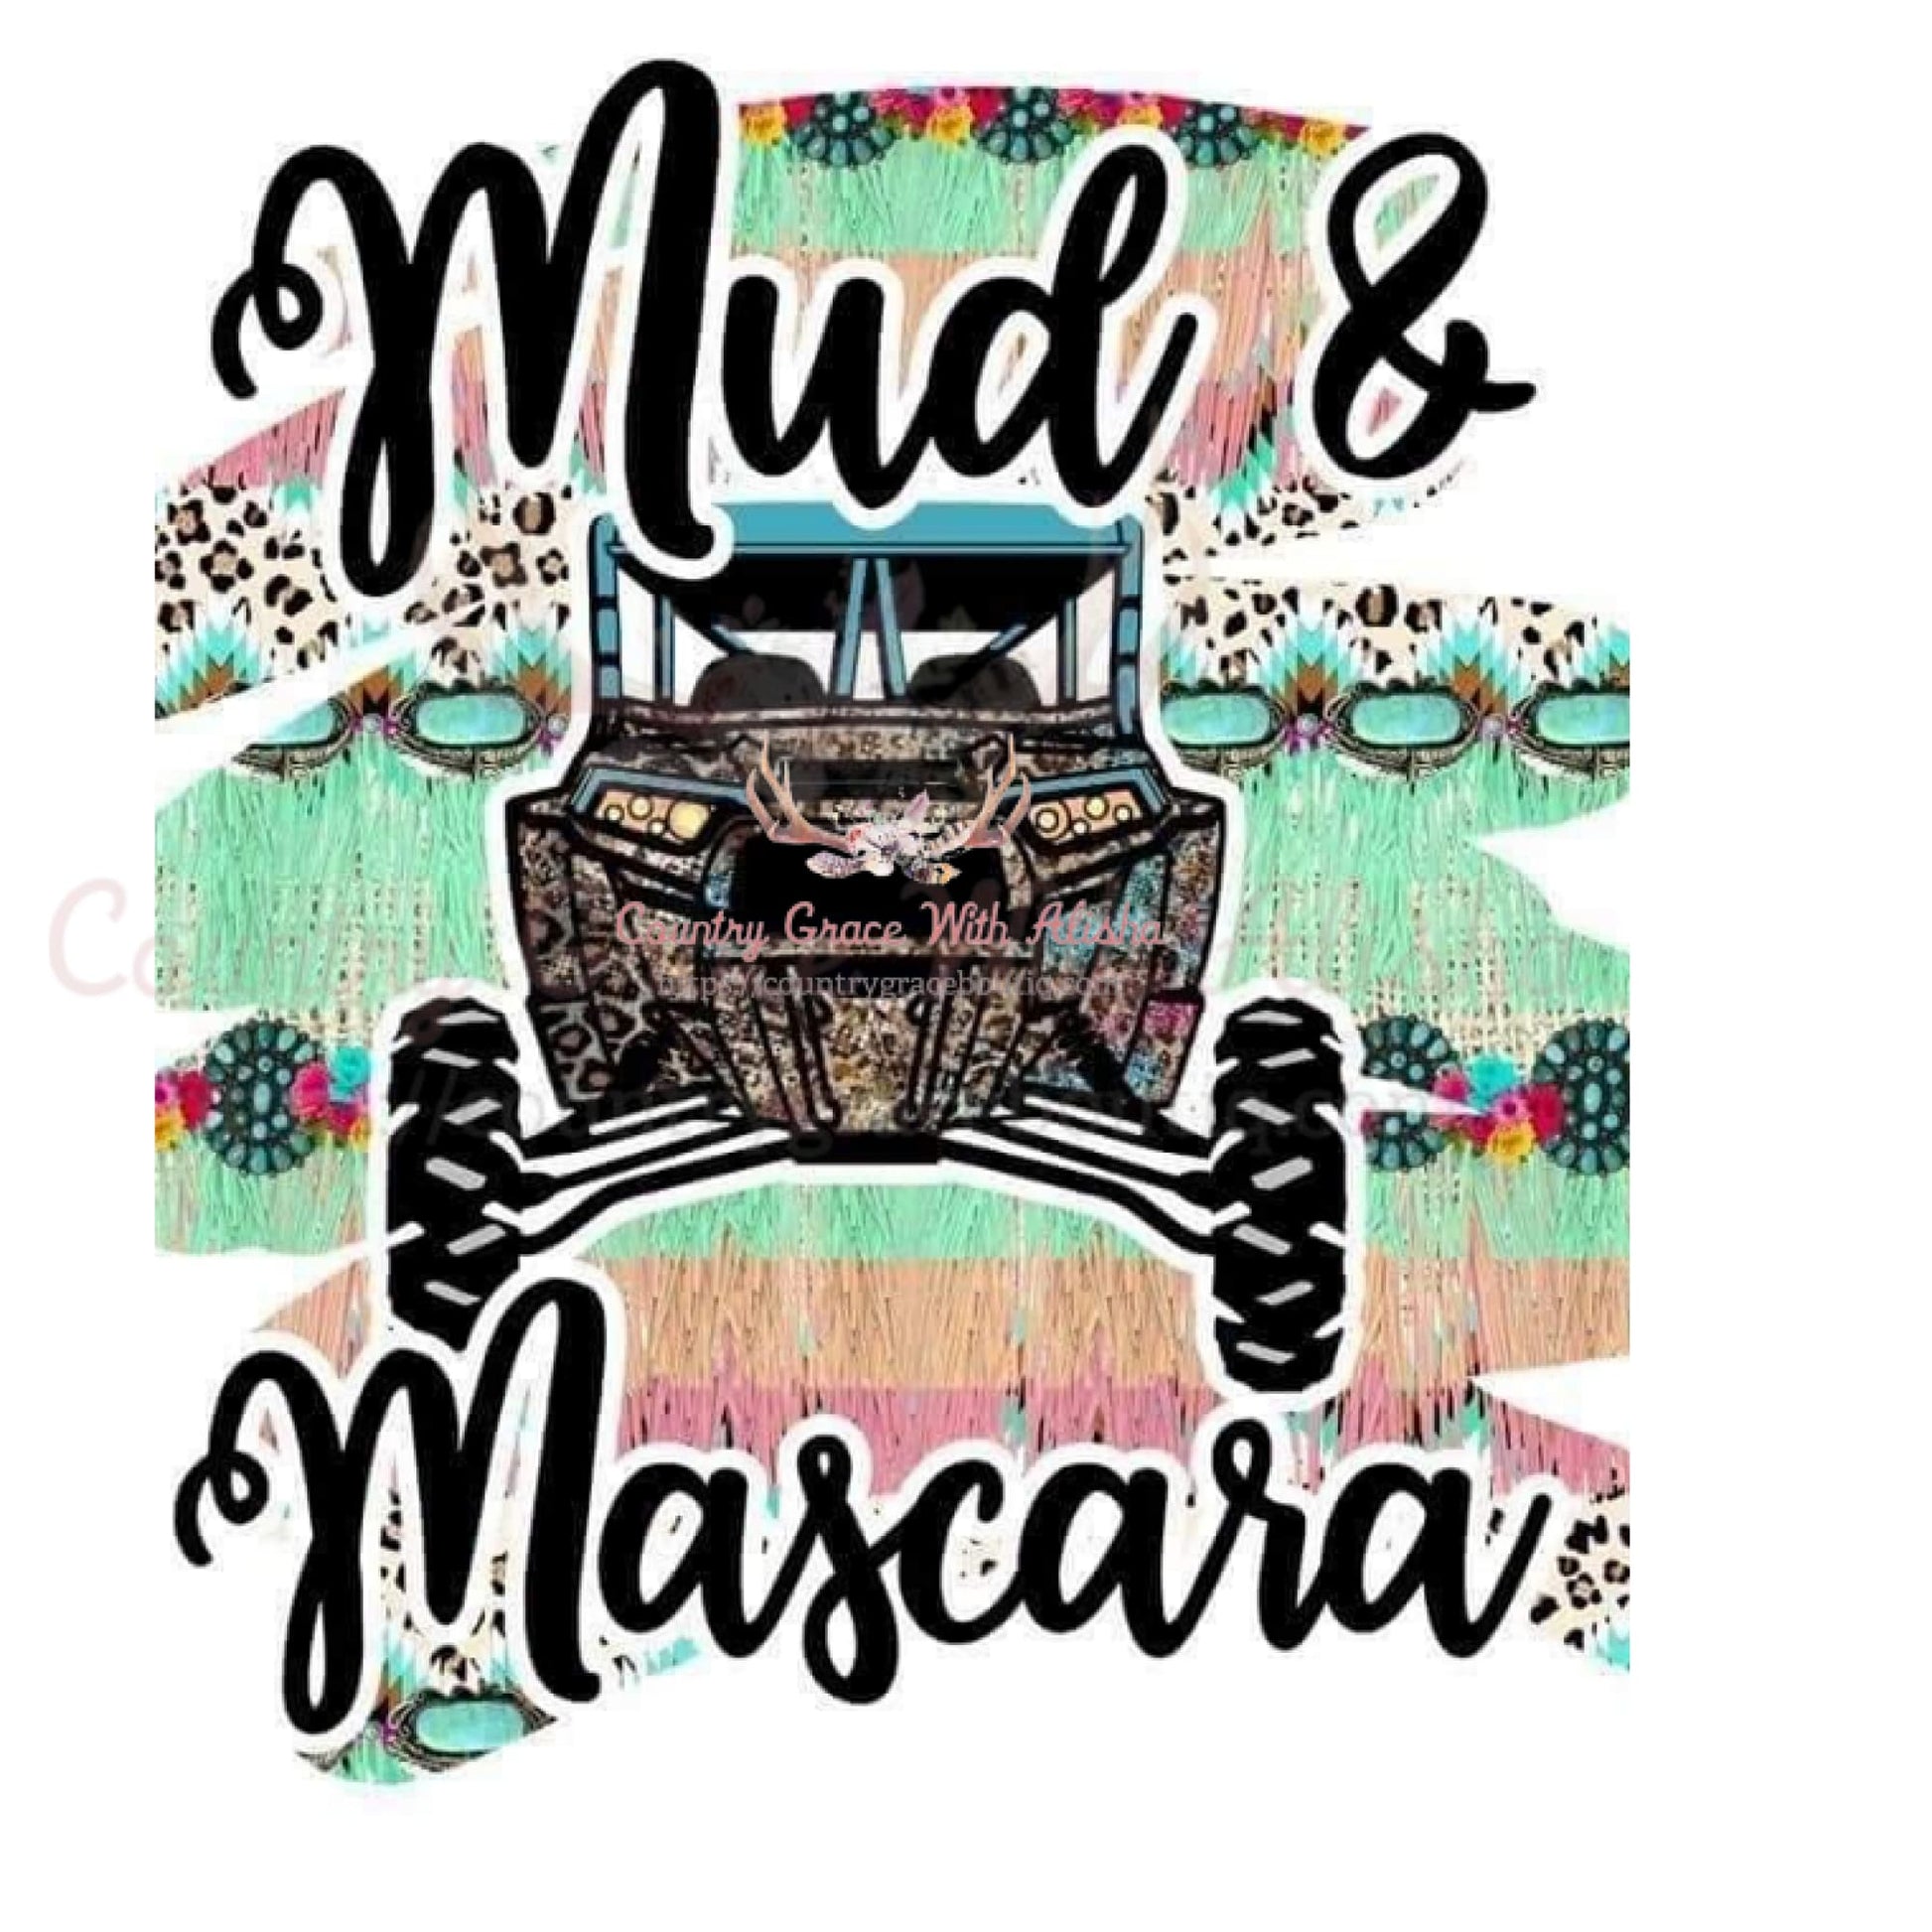 Mud and Mascara Sublimation Transfer - Sub $1.50 Country 